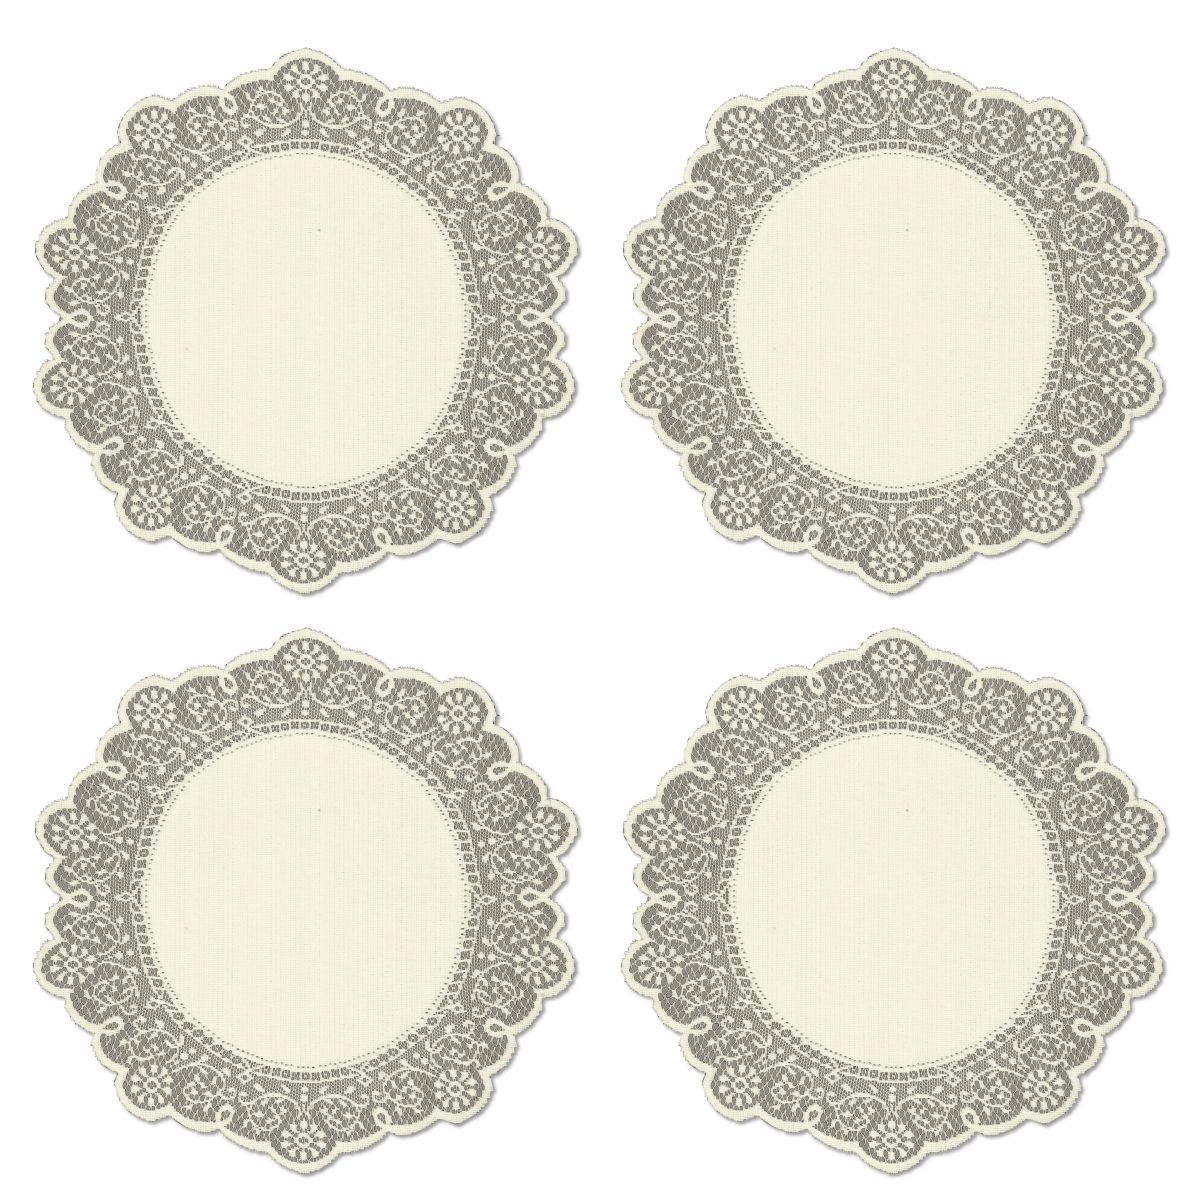 Picture of Heritage Lace PR-1200E-S 12 in. Prelude Round Doilies, Ecru - Set of 4